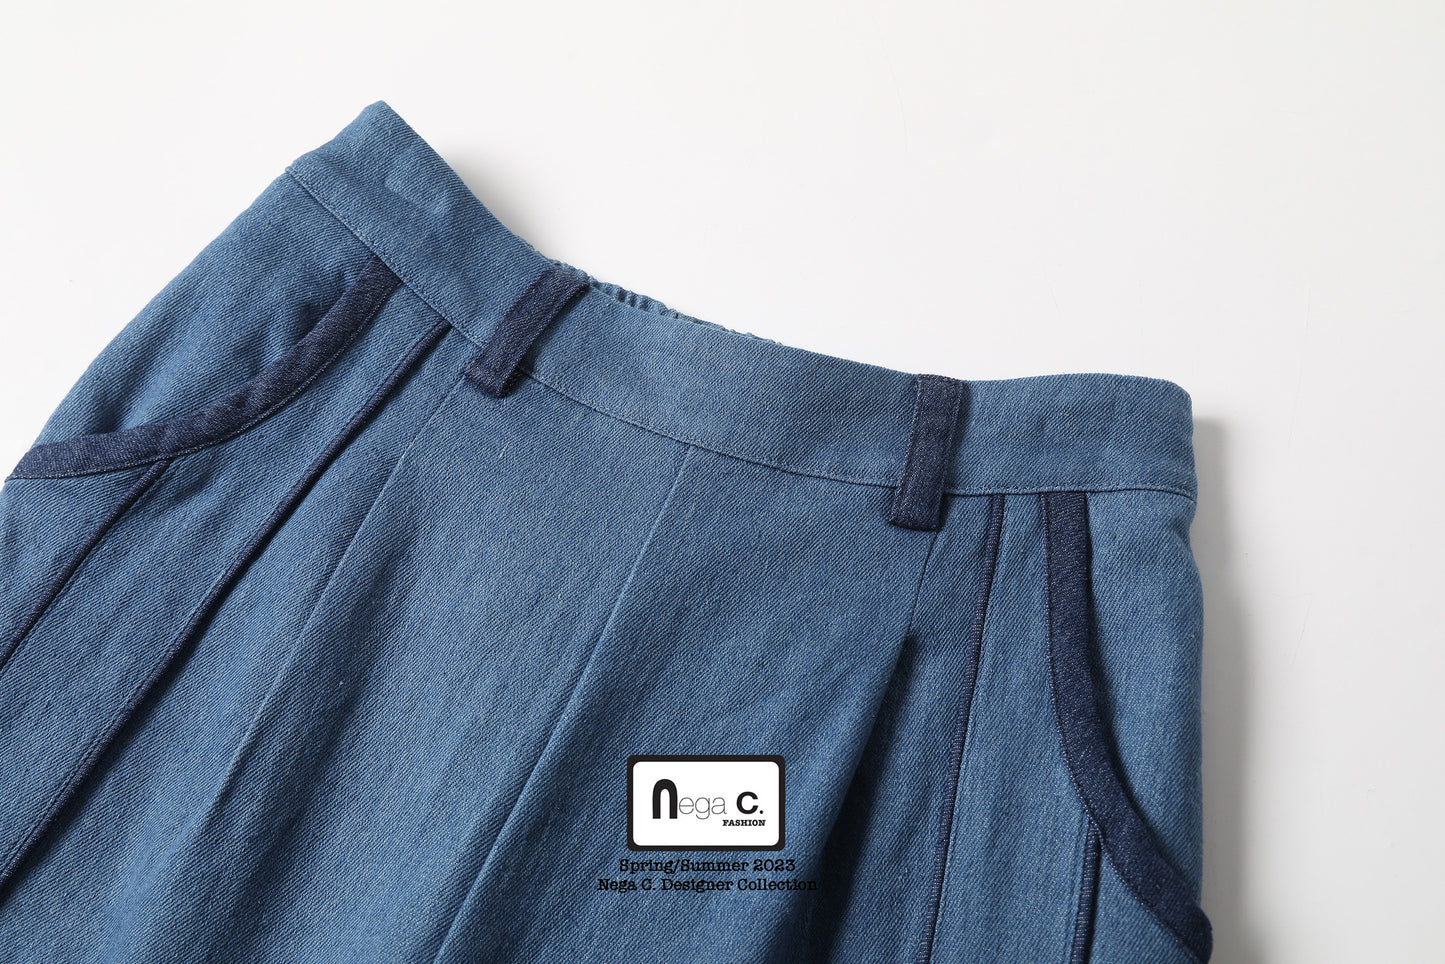 Nega C. color block wide-leg jeans with piping details |Blue|